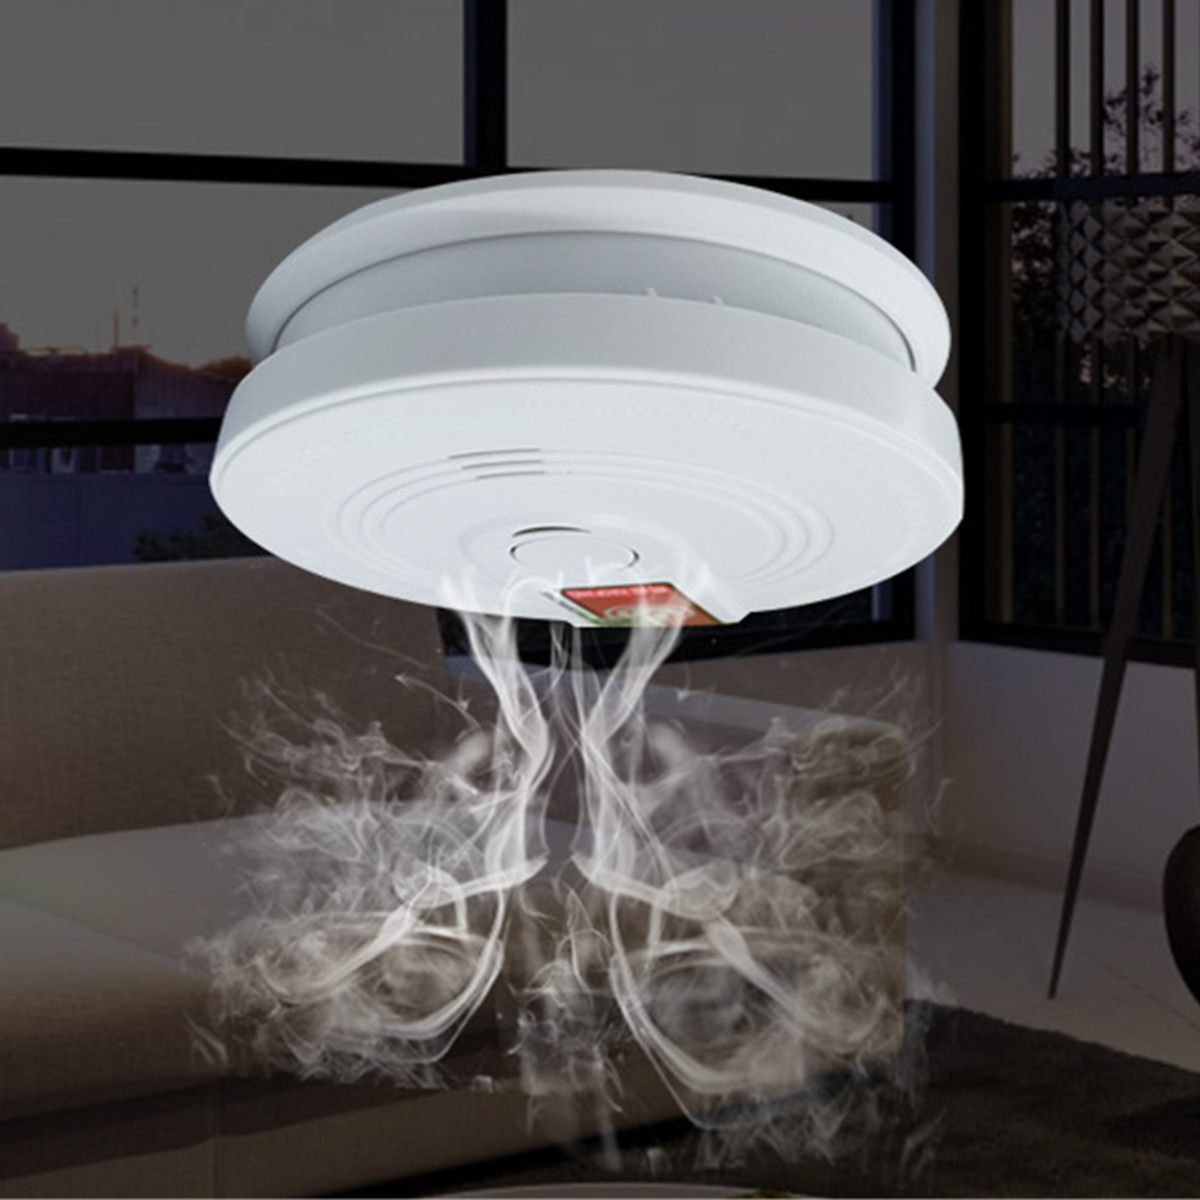 Portable-Battery-Operated-Home-Fire-Smoke-Alarm-Safety-Wireless-Sensor-Tool-1500359